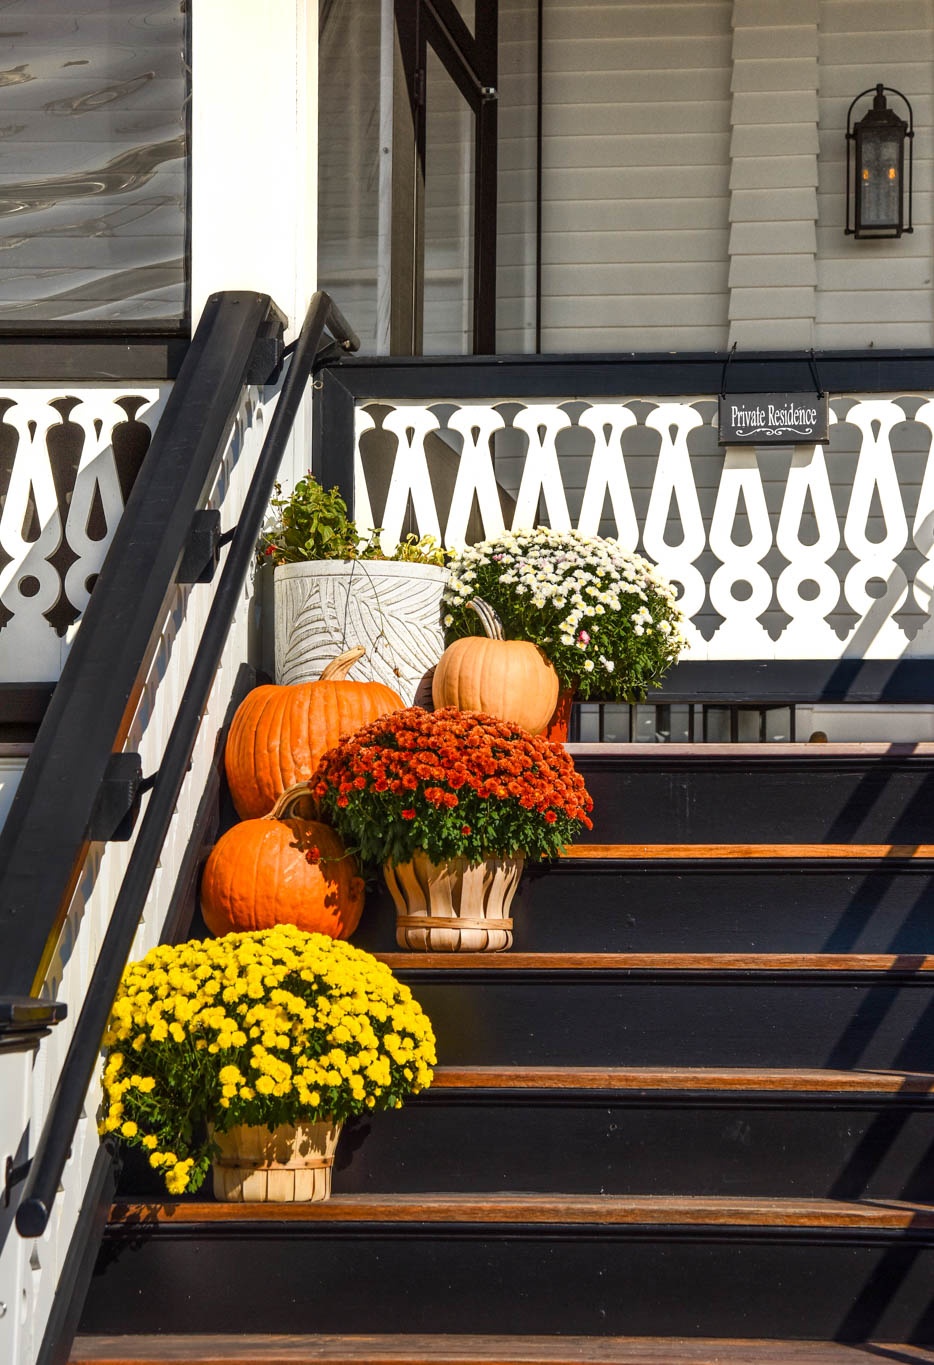 Walking by a Private Residence with flowers and pumpkins on the steps